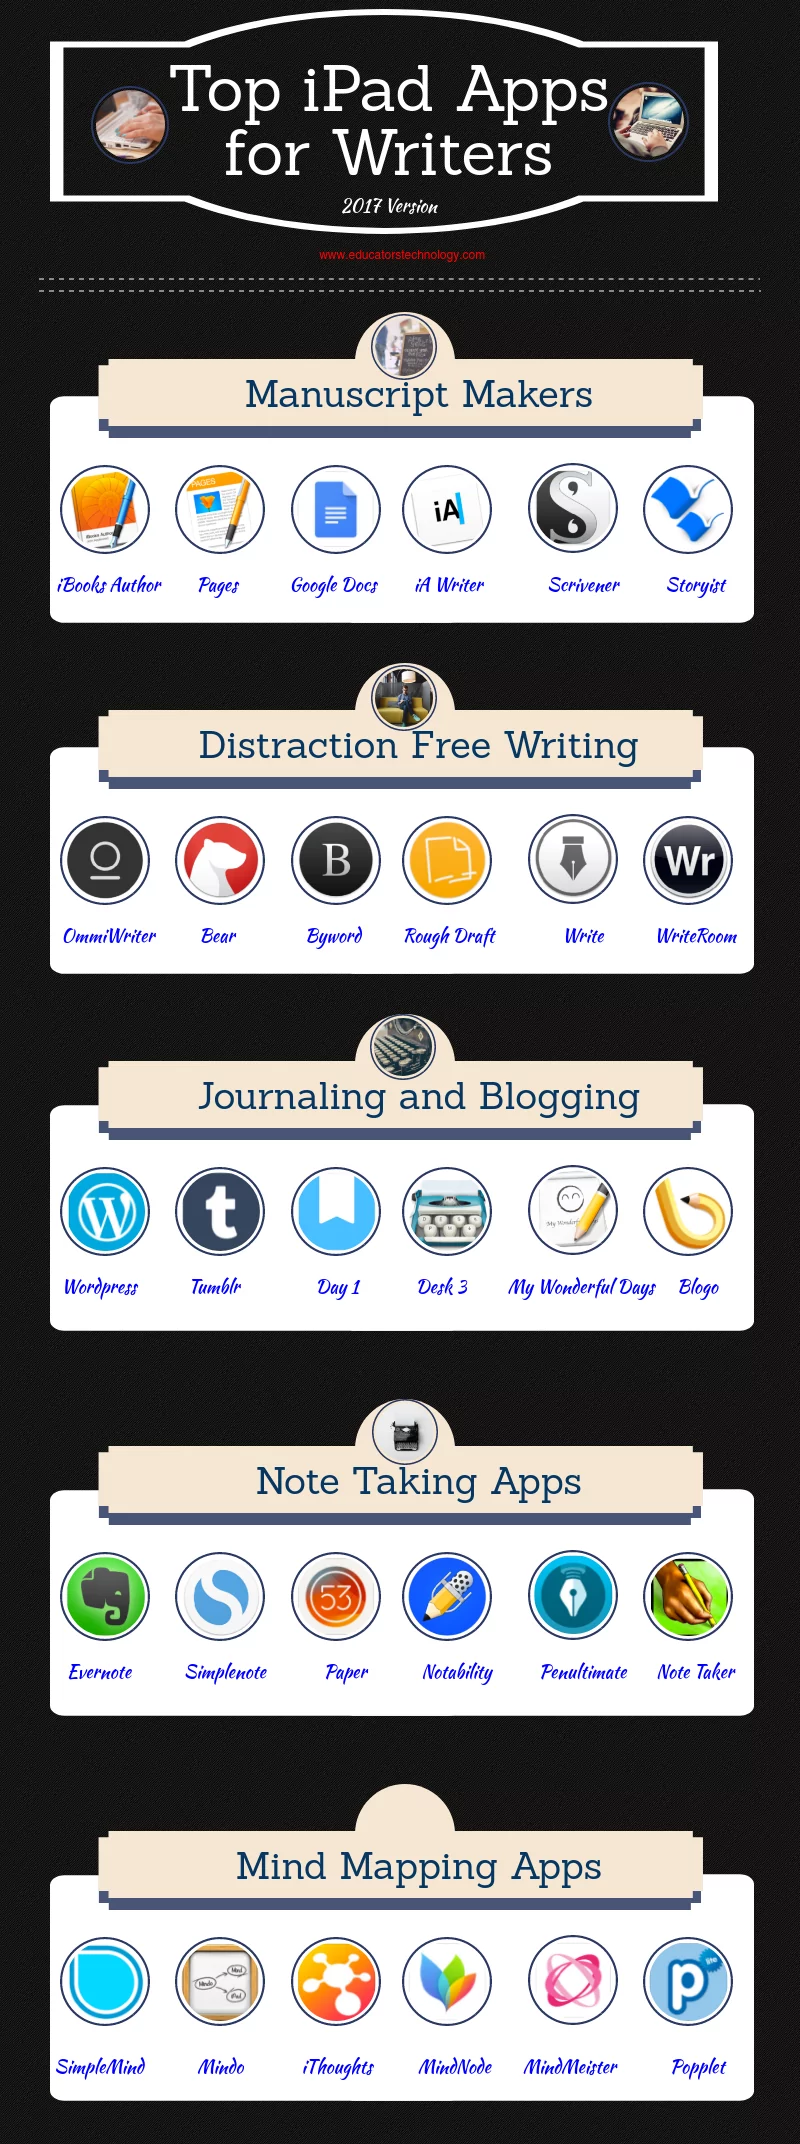 Some Very Good Writing Apps for Teachers and Students